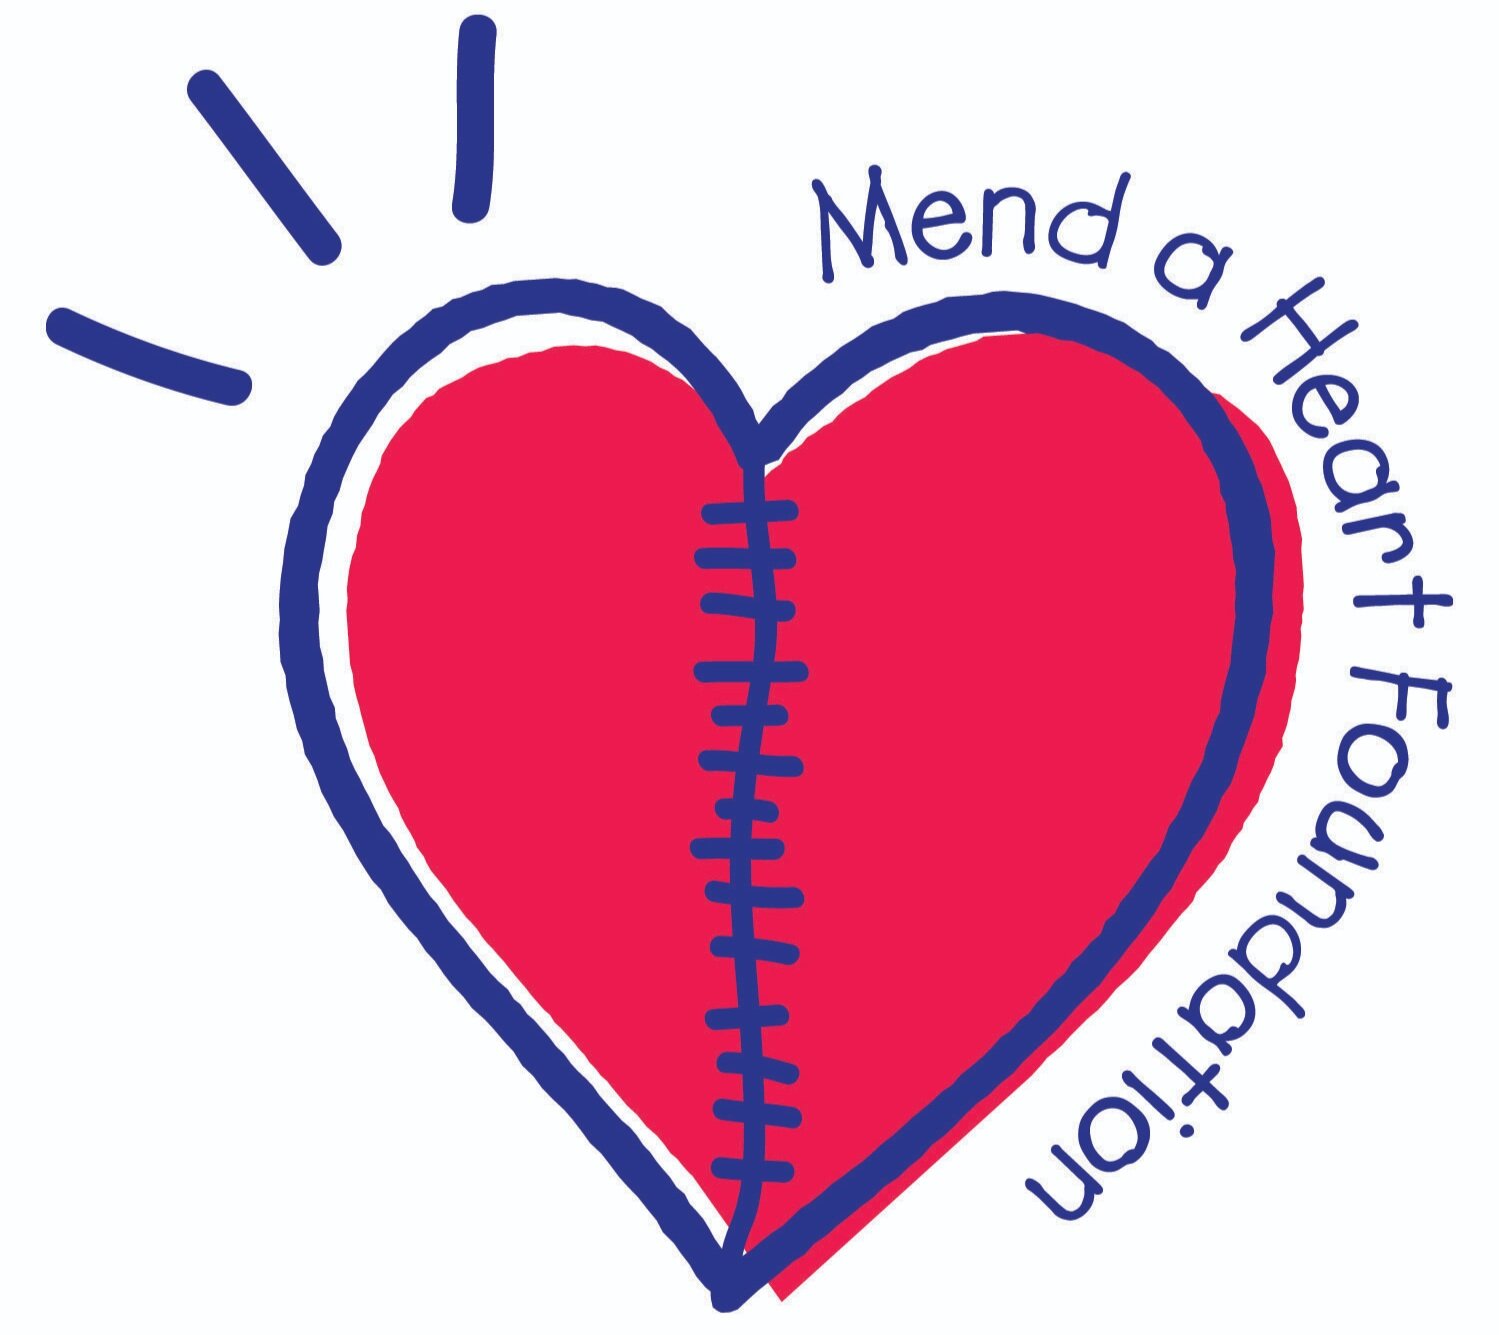 Mend A Heart Foundation